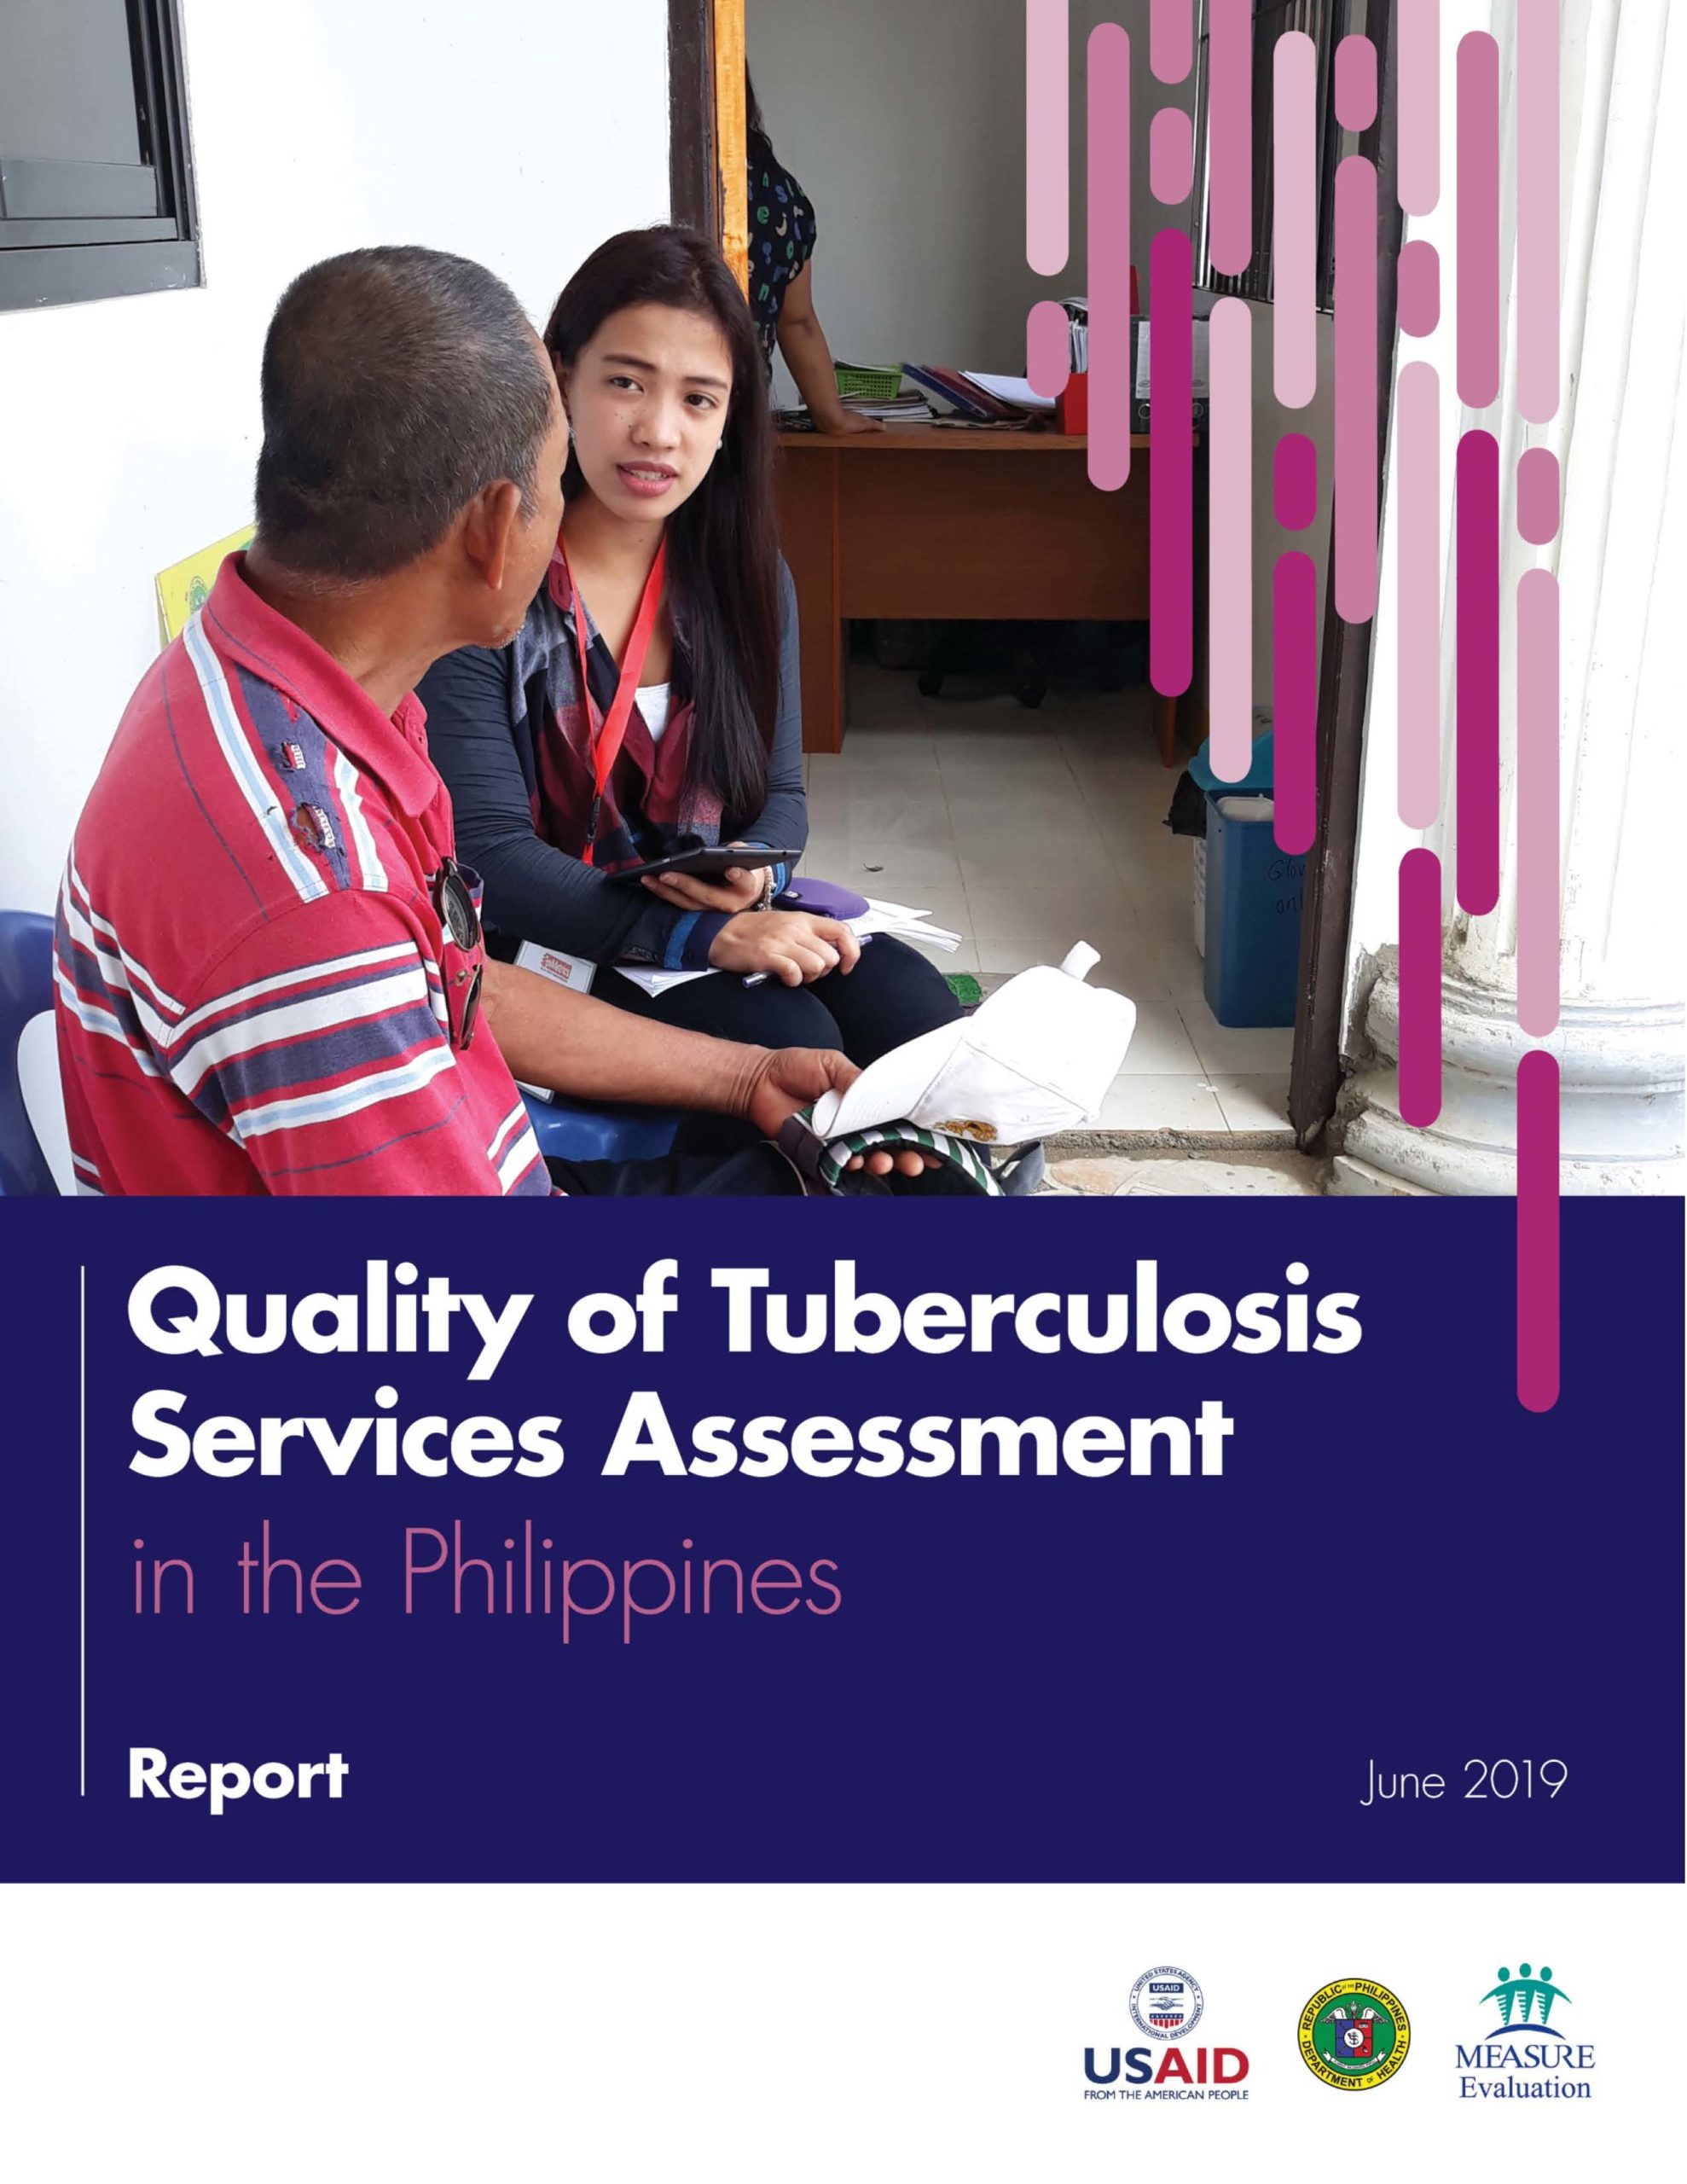 Quality of Tuberculosis Services Assessment in the Philippines: Report